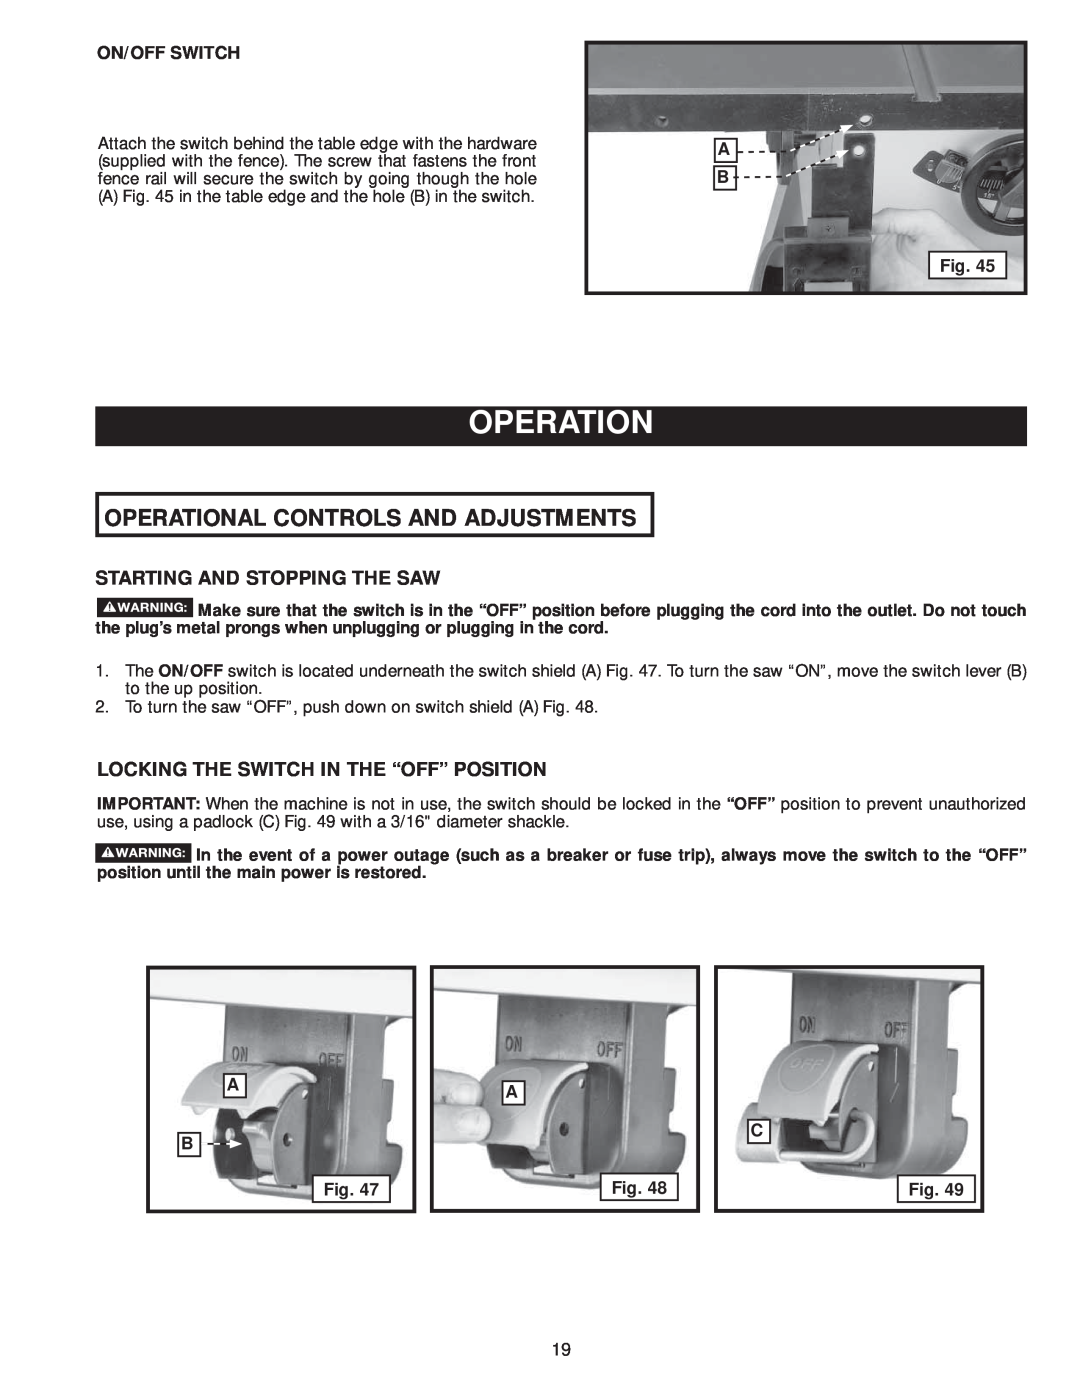 Delta 36-978, 36-979 instruction manual Operation, Starting And Stopping The Saw, Locking The Switch In The “Off” Position 